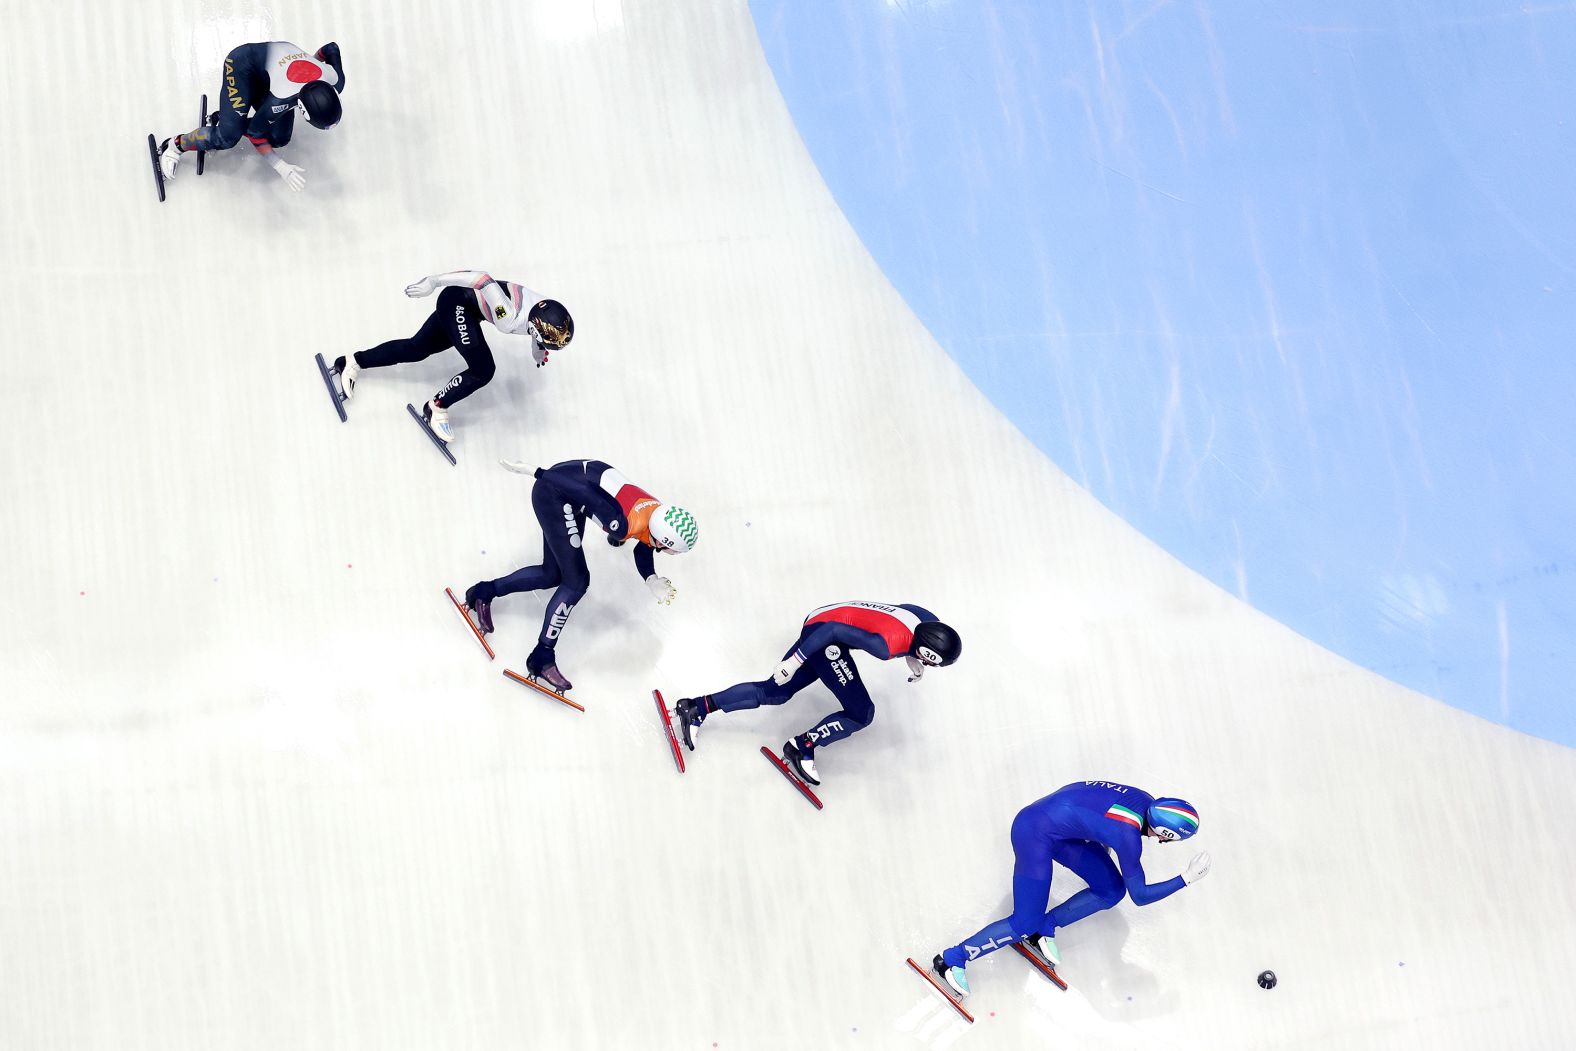 Kay Huisman of Netherlands, Quentin Fercoq of France, Ben Jung Yanghun of Germany, Shogo Miyata of Japan and Thomas Nadalini of Italy compete in the men's 500 meters semifinal during ISU World Short Track Speed Skating Championships in Rotterdam, Netherlands, on Saturday, March 16.